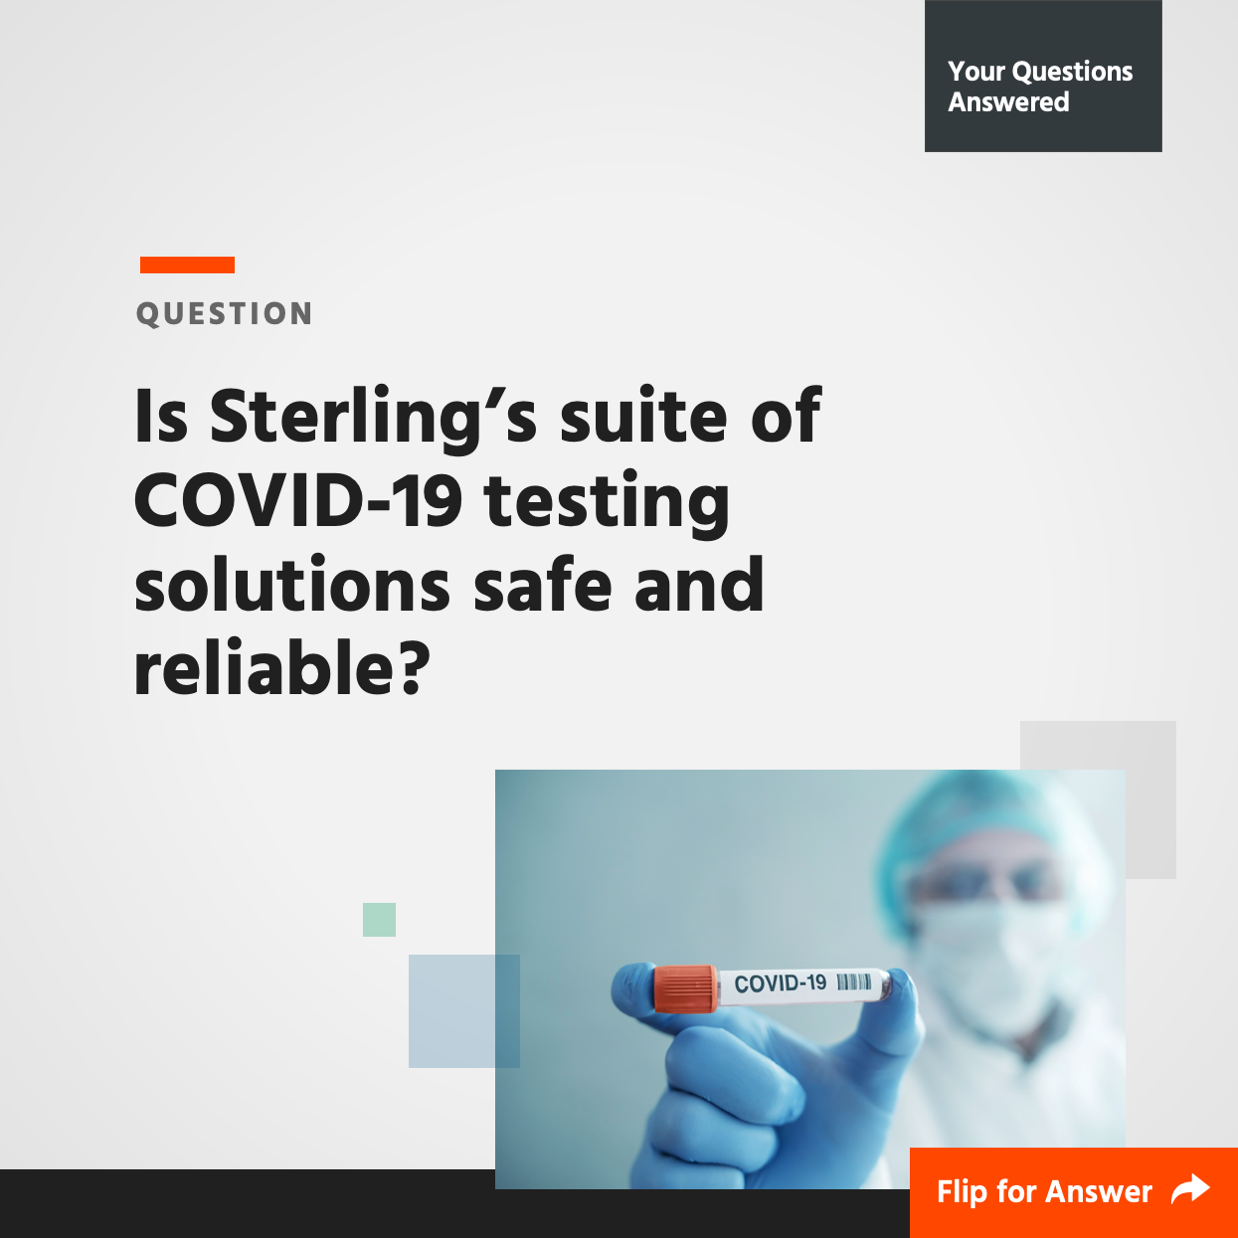 Is Sterling’s suite of COVID-19 testing solutions safe and reliable?